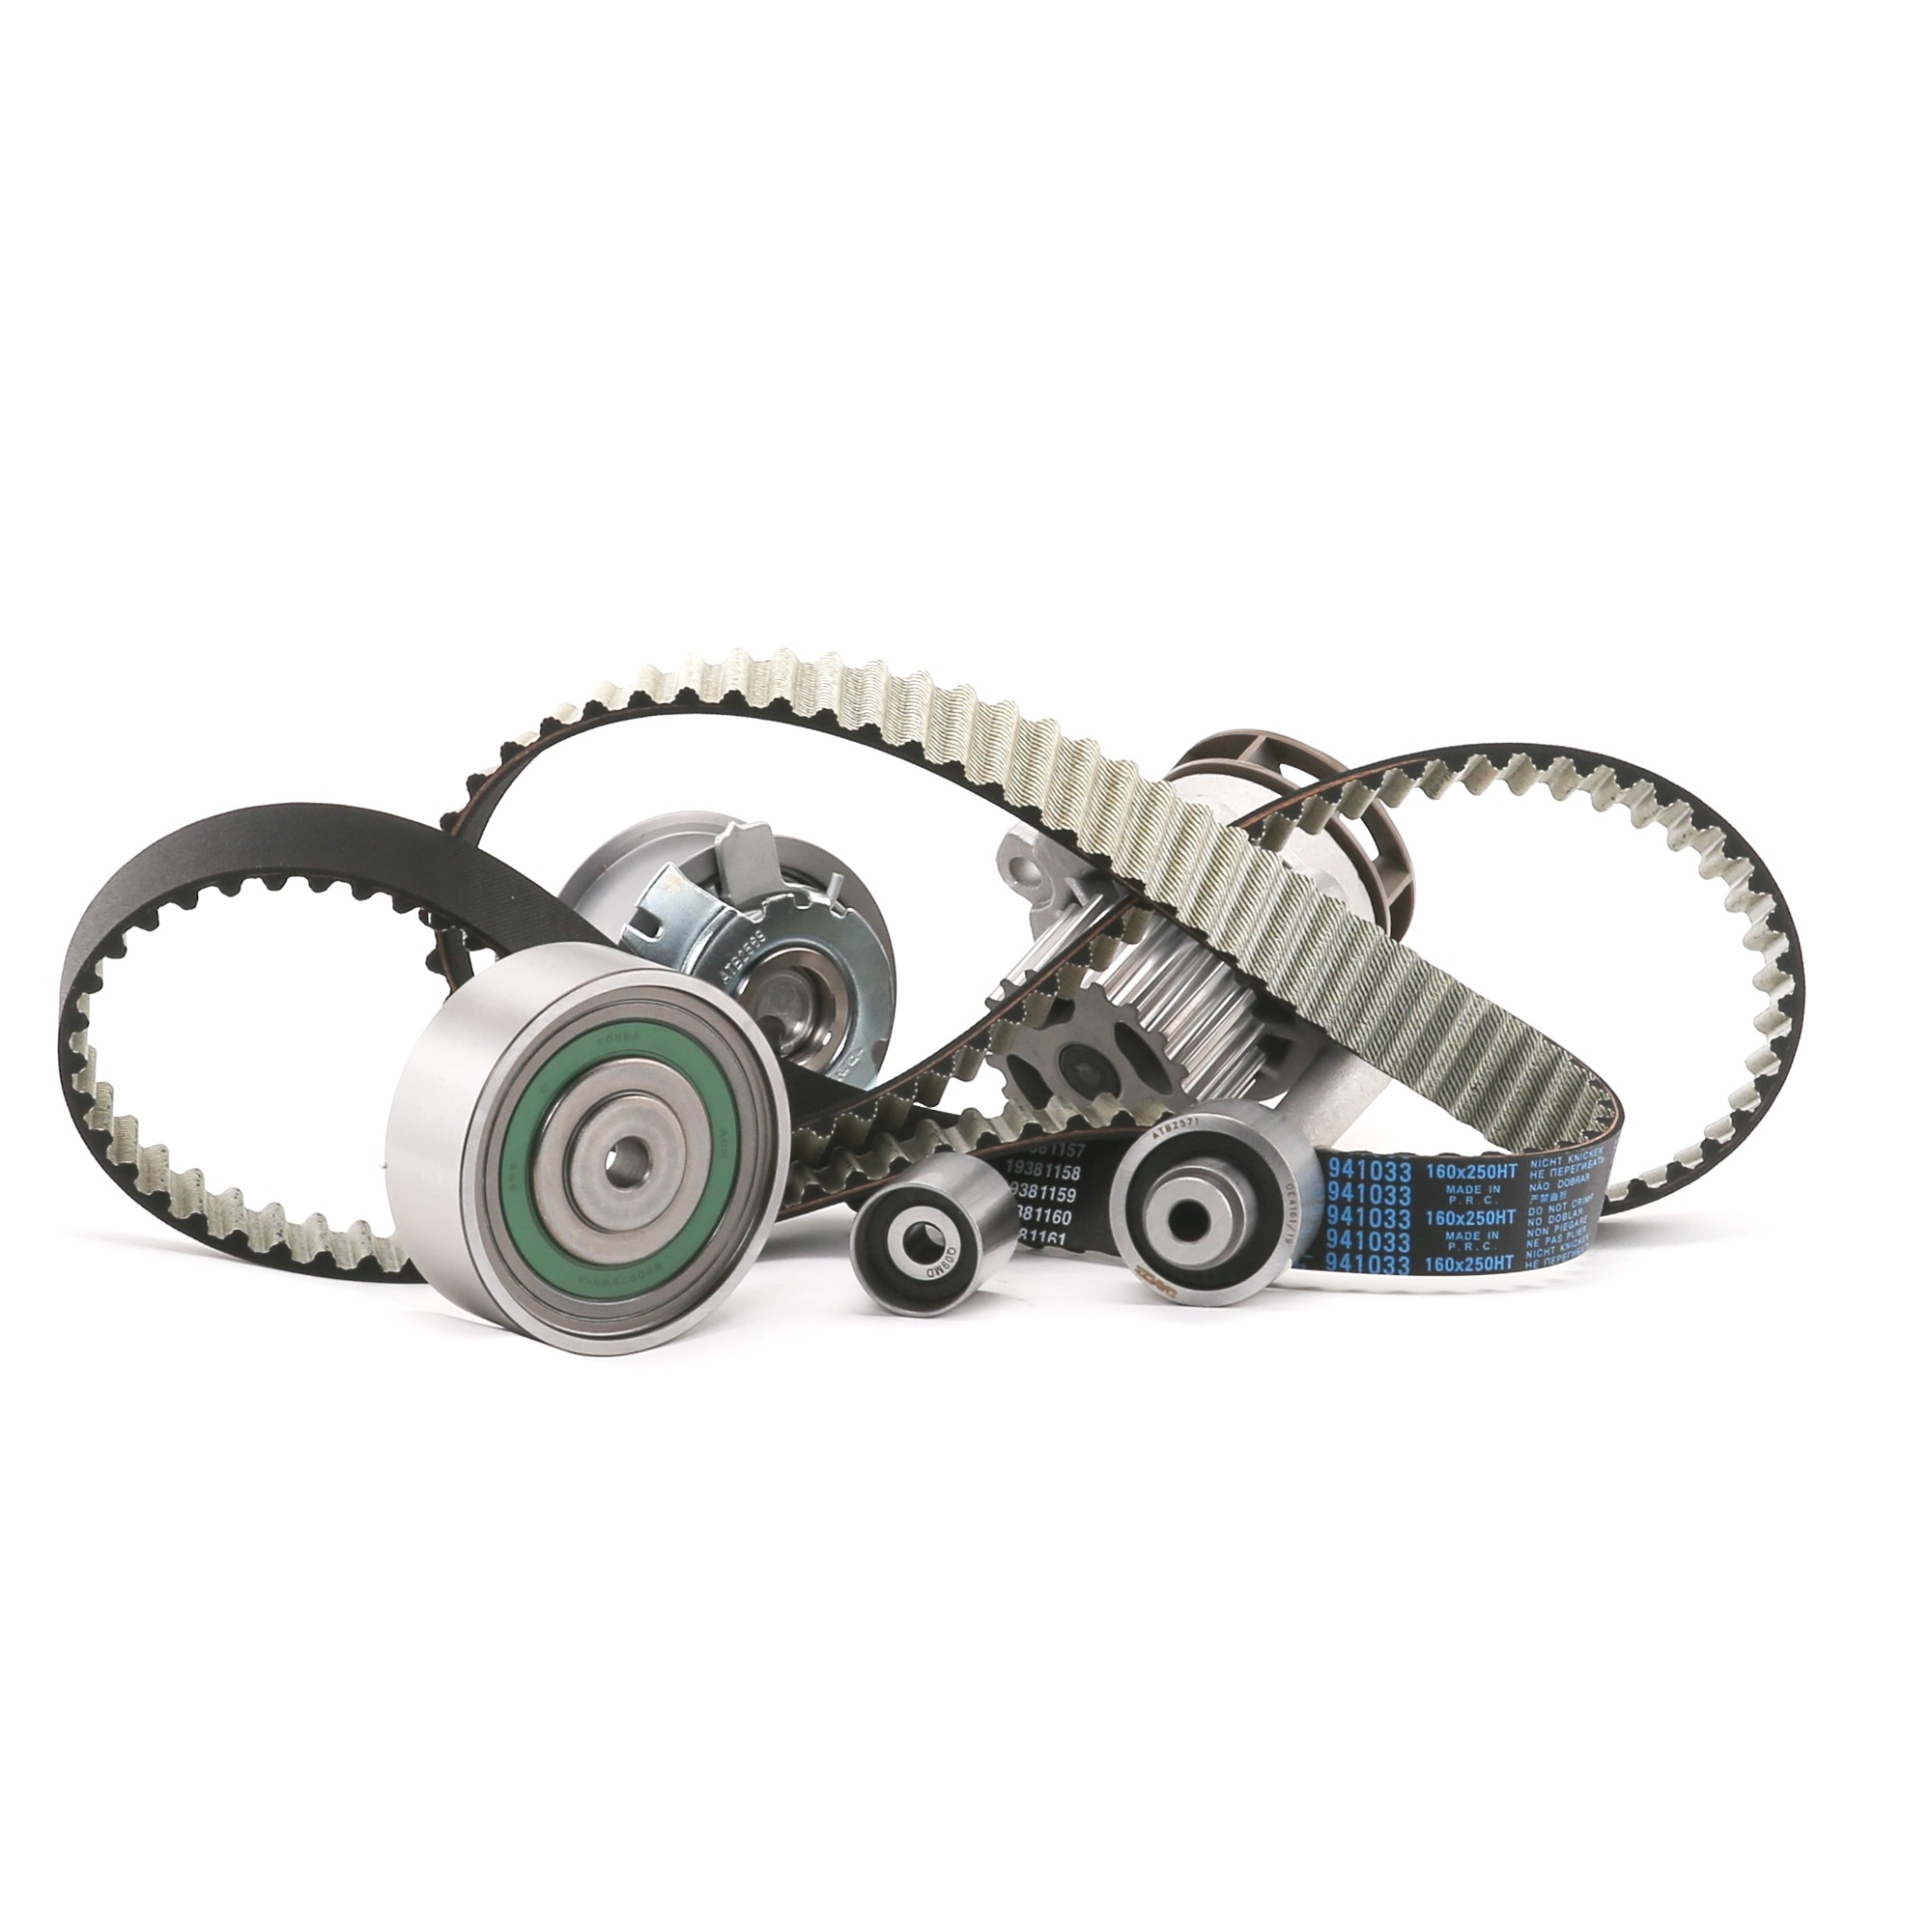 DAYCO Water pump and timing belt kit KTBWP7880